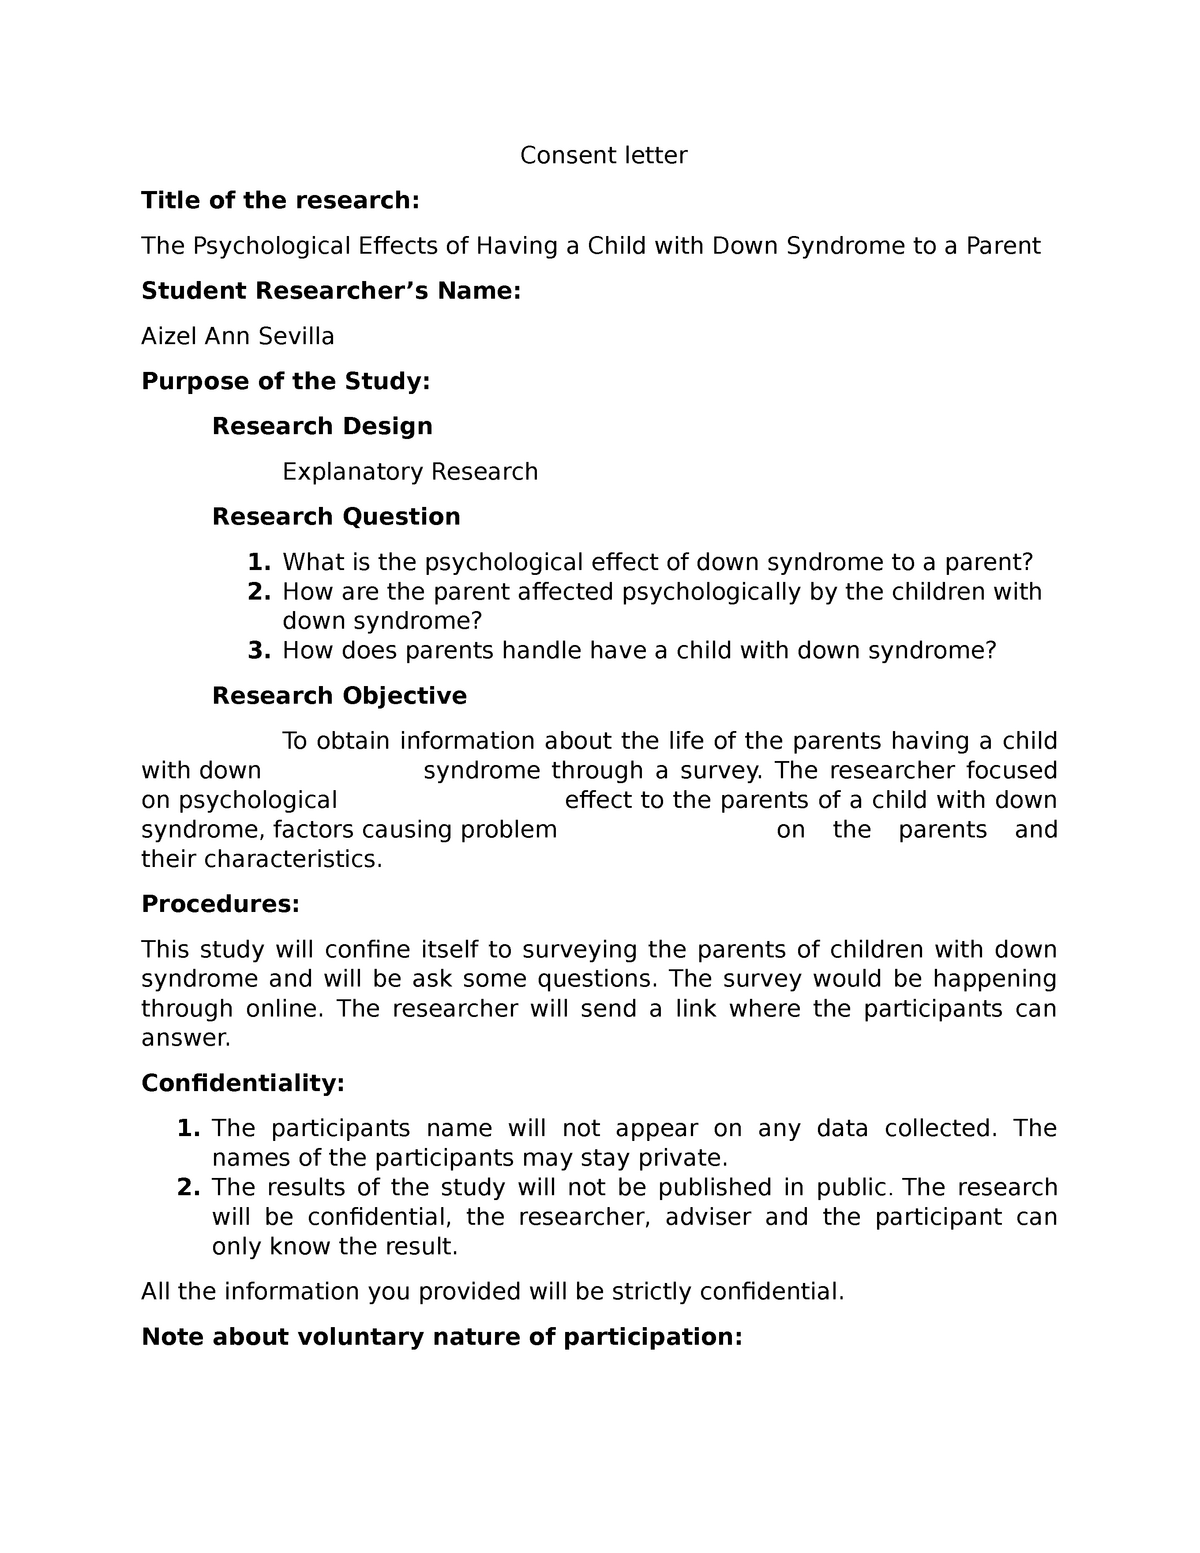 Consent Letter - school home work - Consent letter Title of the ...